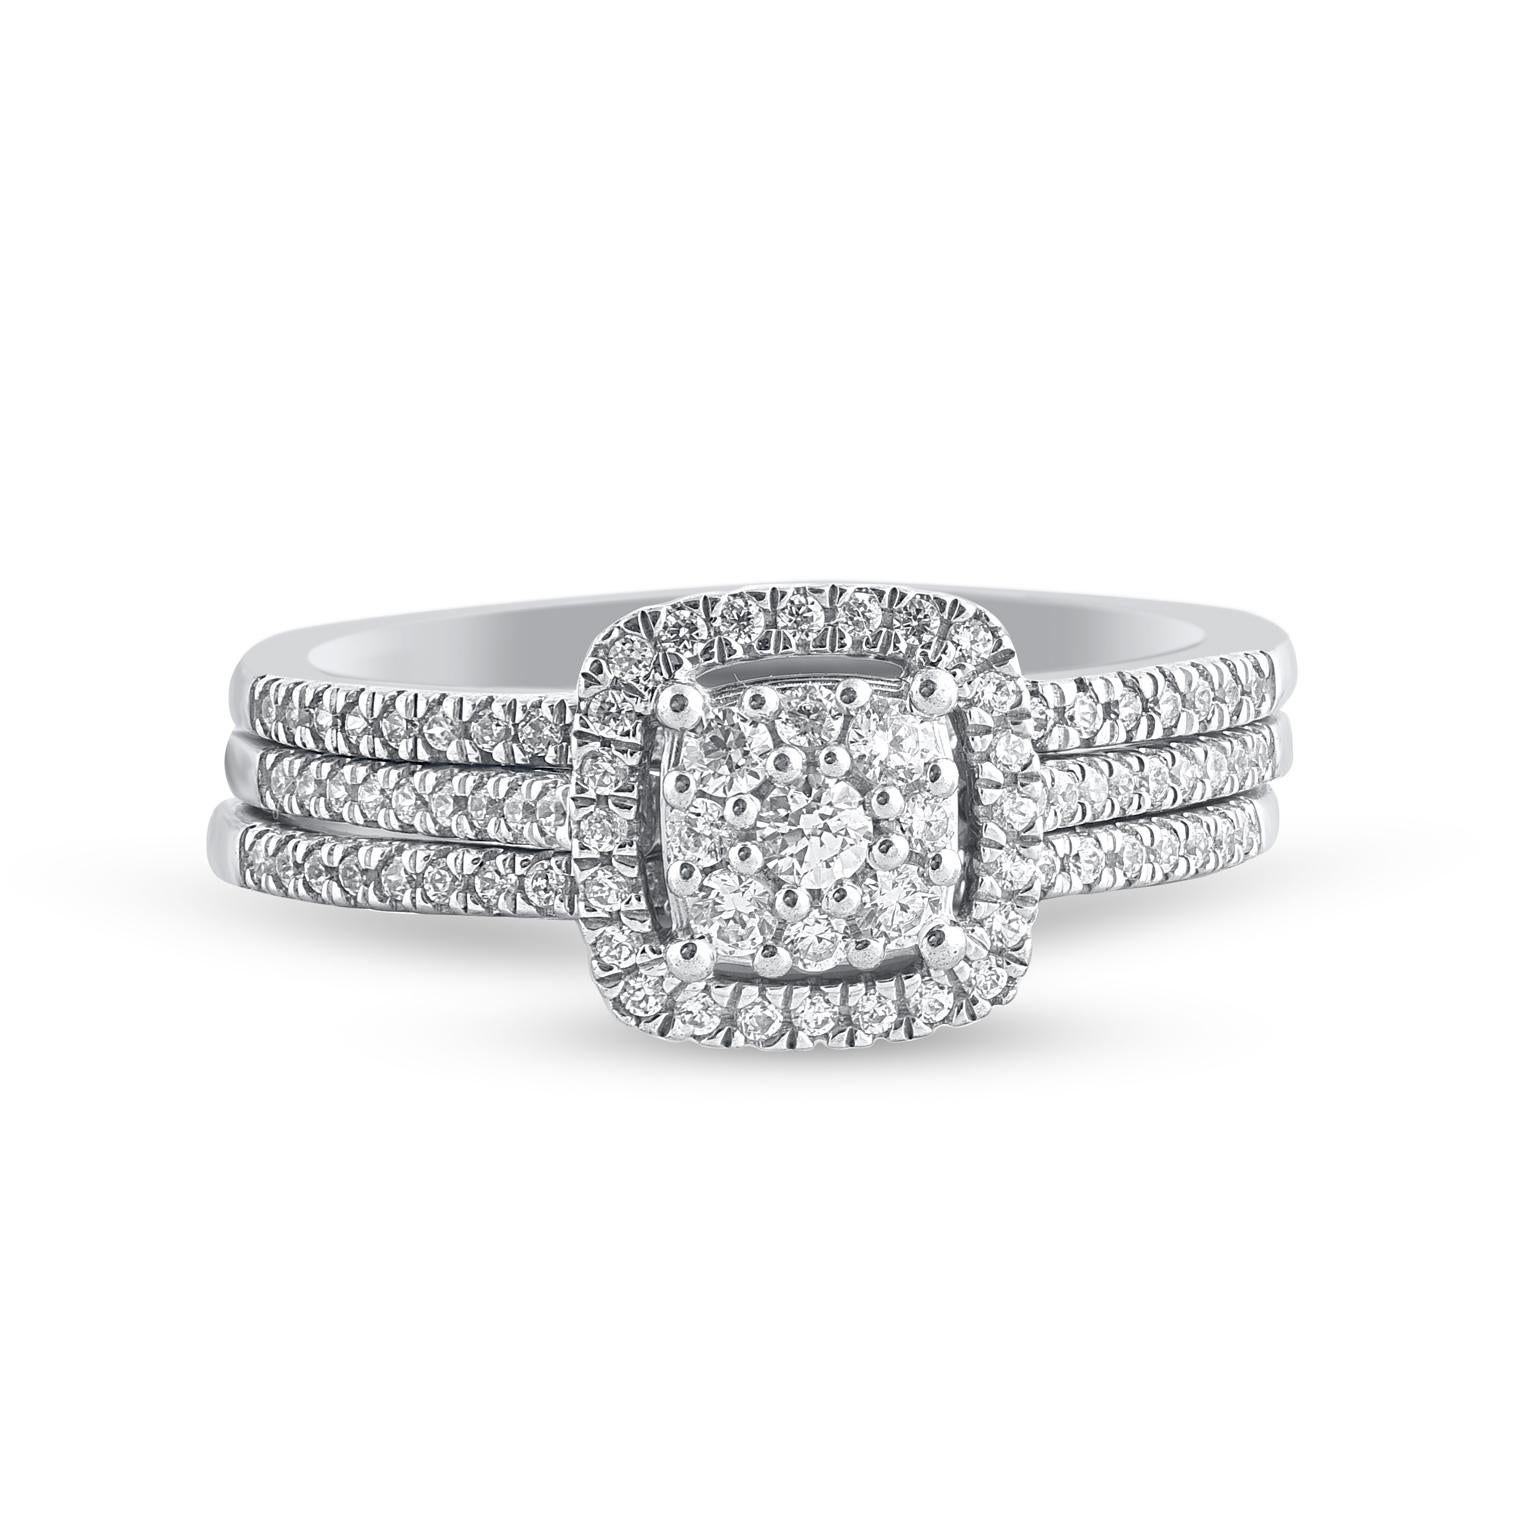 On that special day, express all your love with this elegant and dazzling diamond bridal set. Crafted in 14 Karat white gold. This wedding ring features a sparkling 97 brilliant cut, single cut round diamond beautifully set in prong setting. The